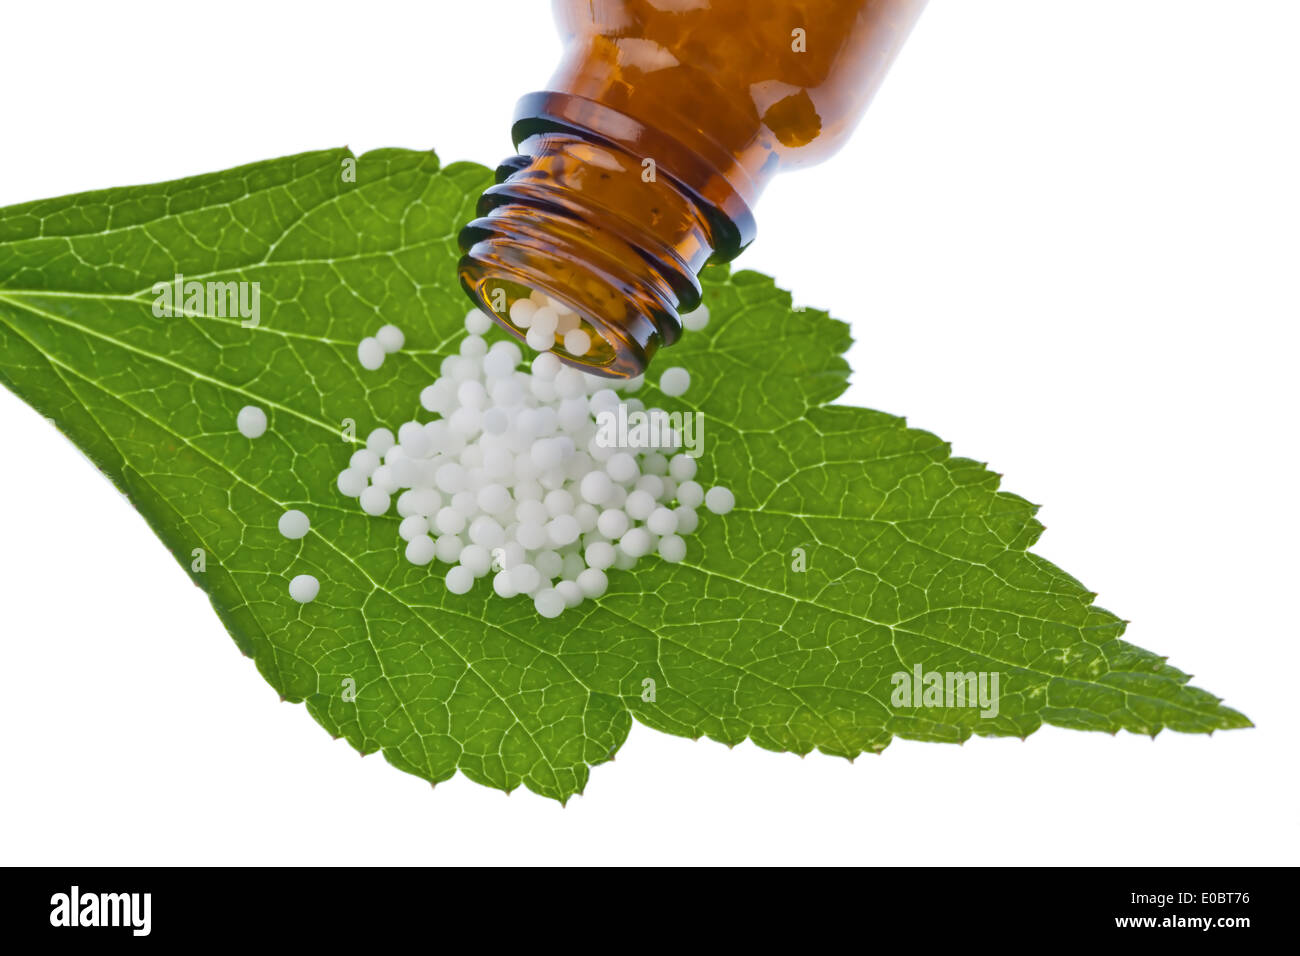 Globuli to the treatment of illnesses in the gentle, alternative medicine. Tablets and drugs Stock Photo